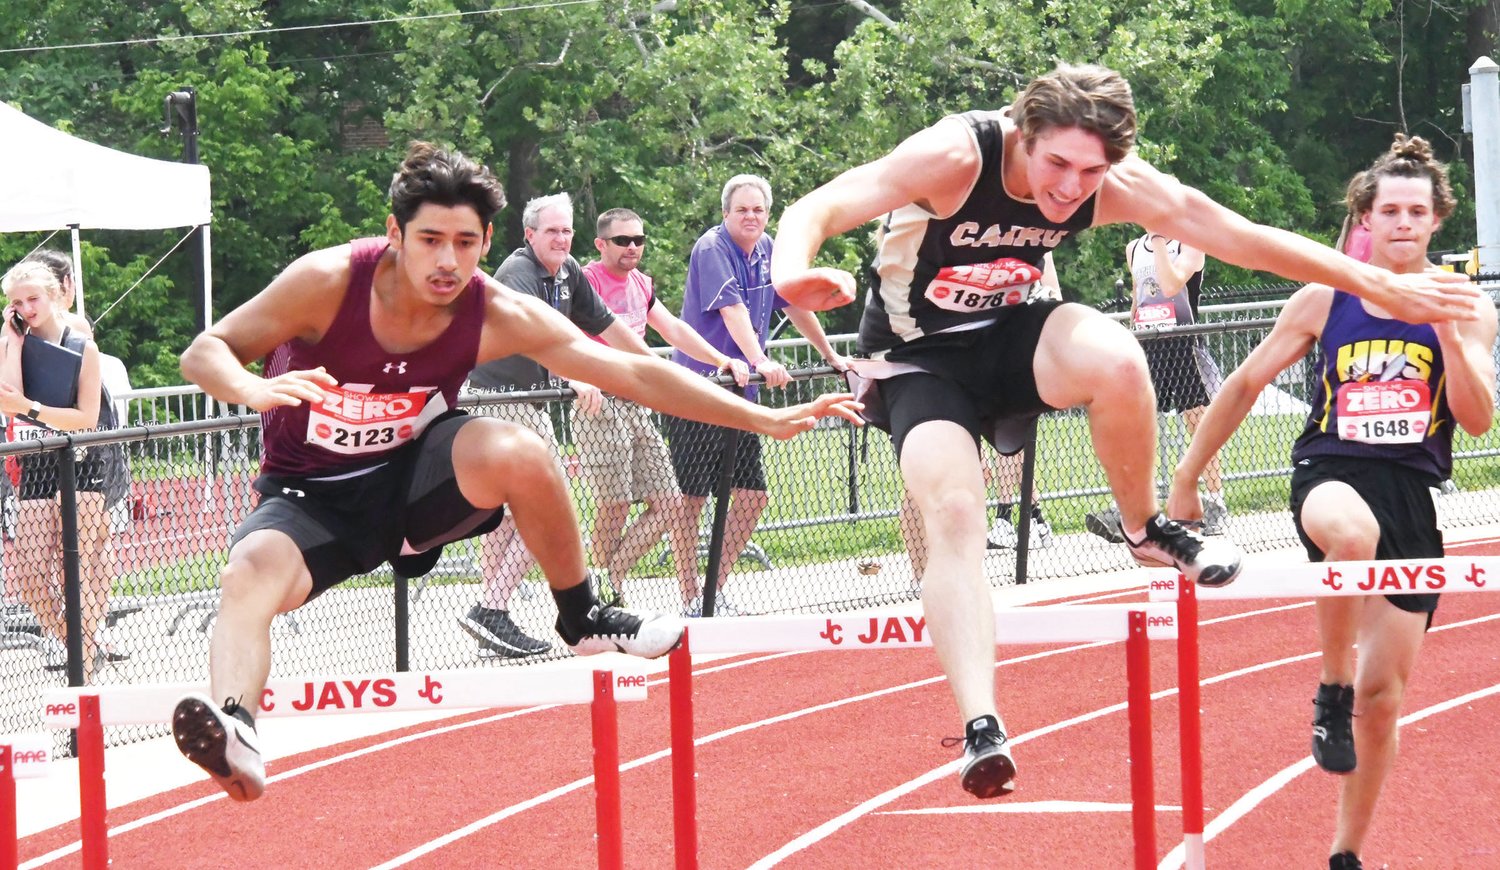 Cairo athlete Logan Head finished with the ninth-fastest time in the state in the Class 1 300-meter intermediate hurdles this season.